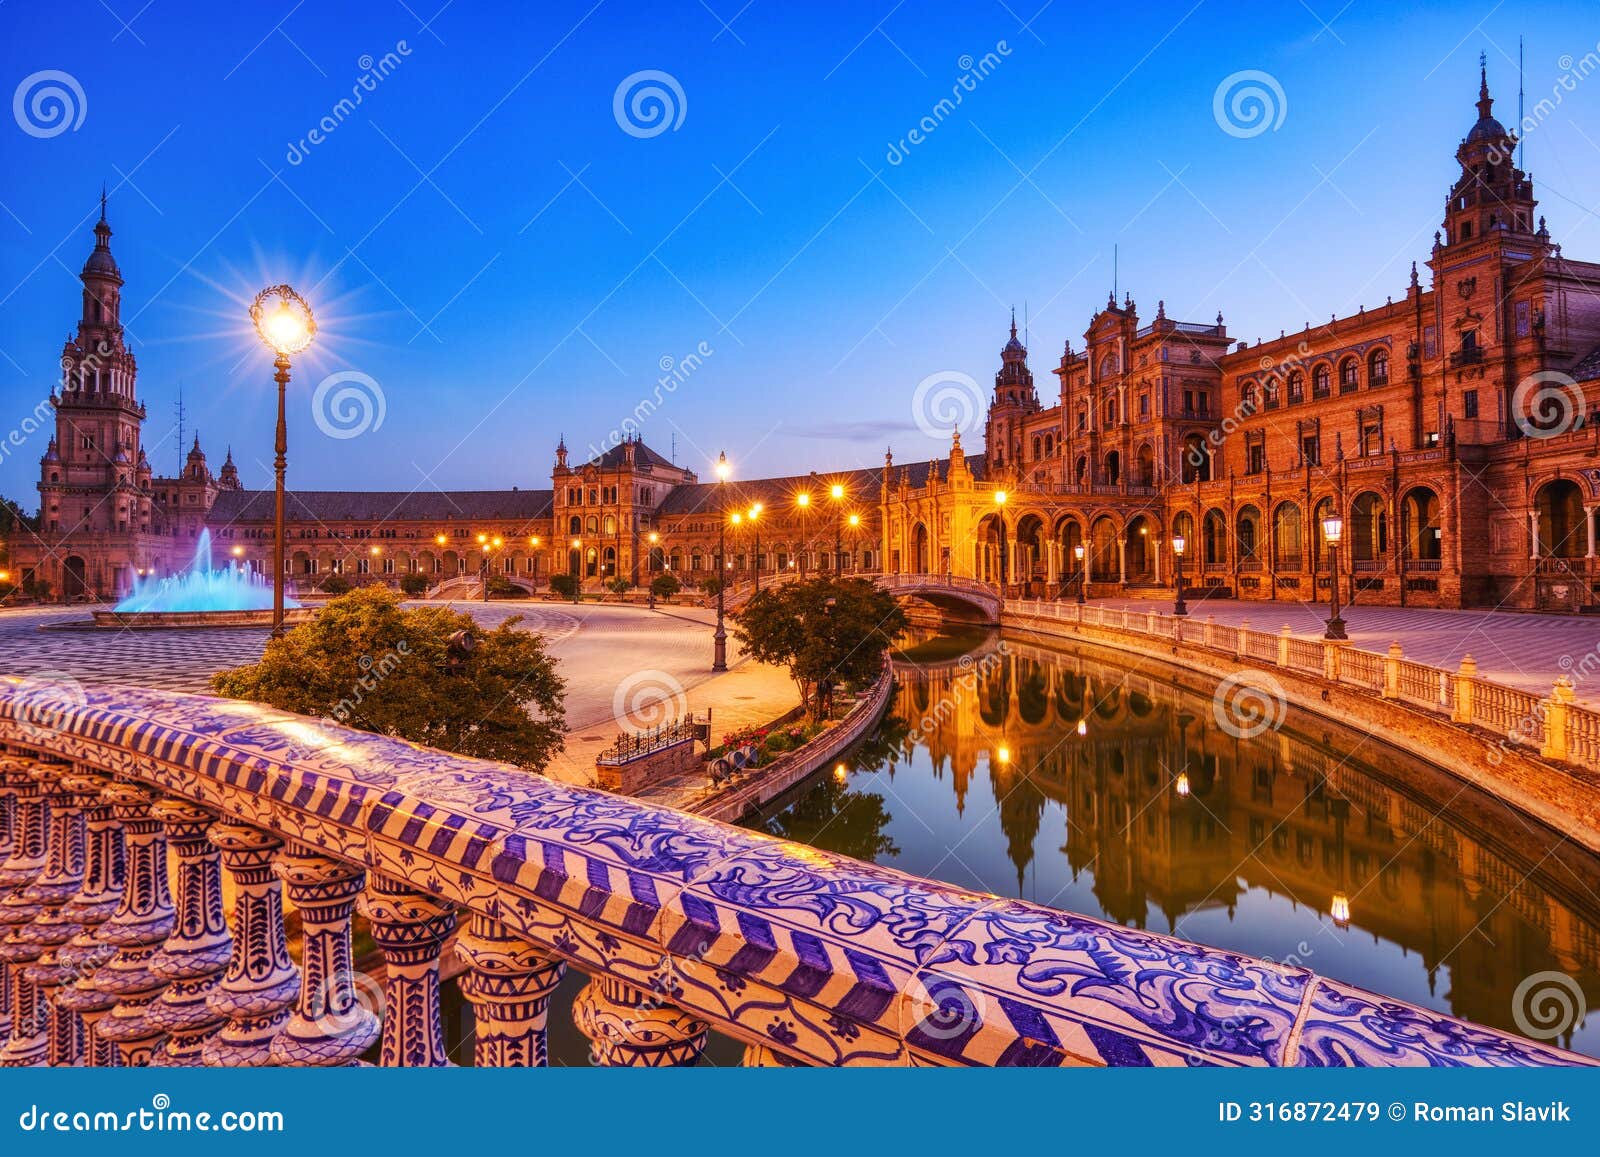 plaza de espana in seville at dusk, andalusia